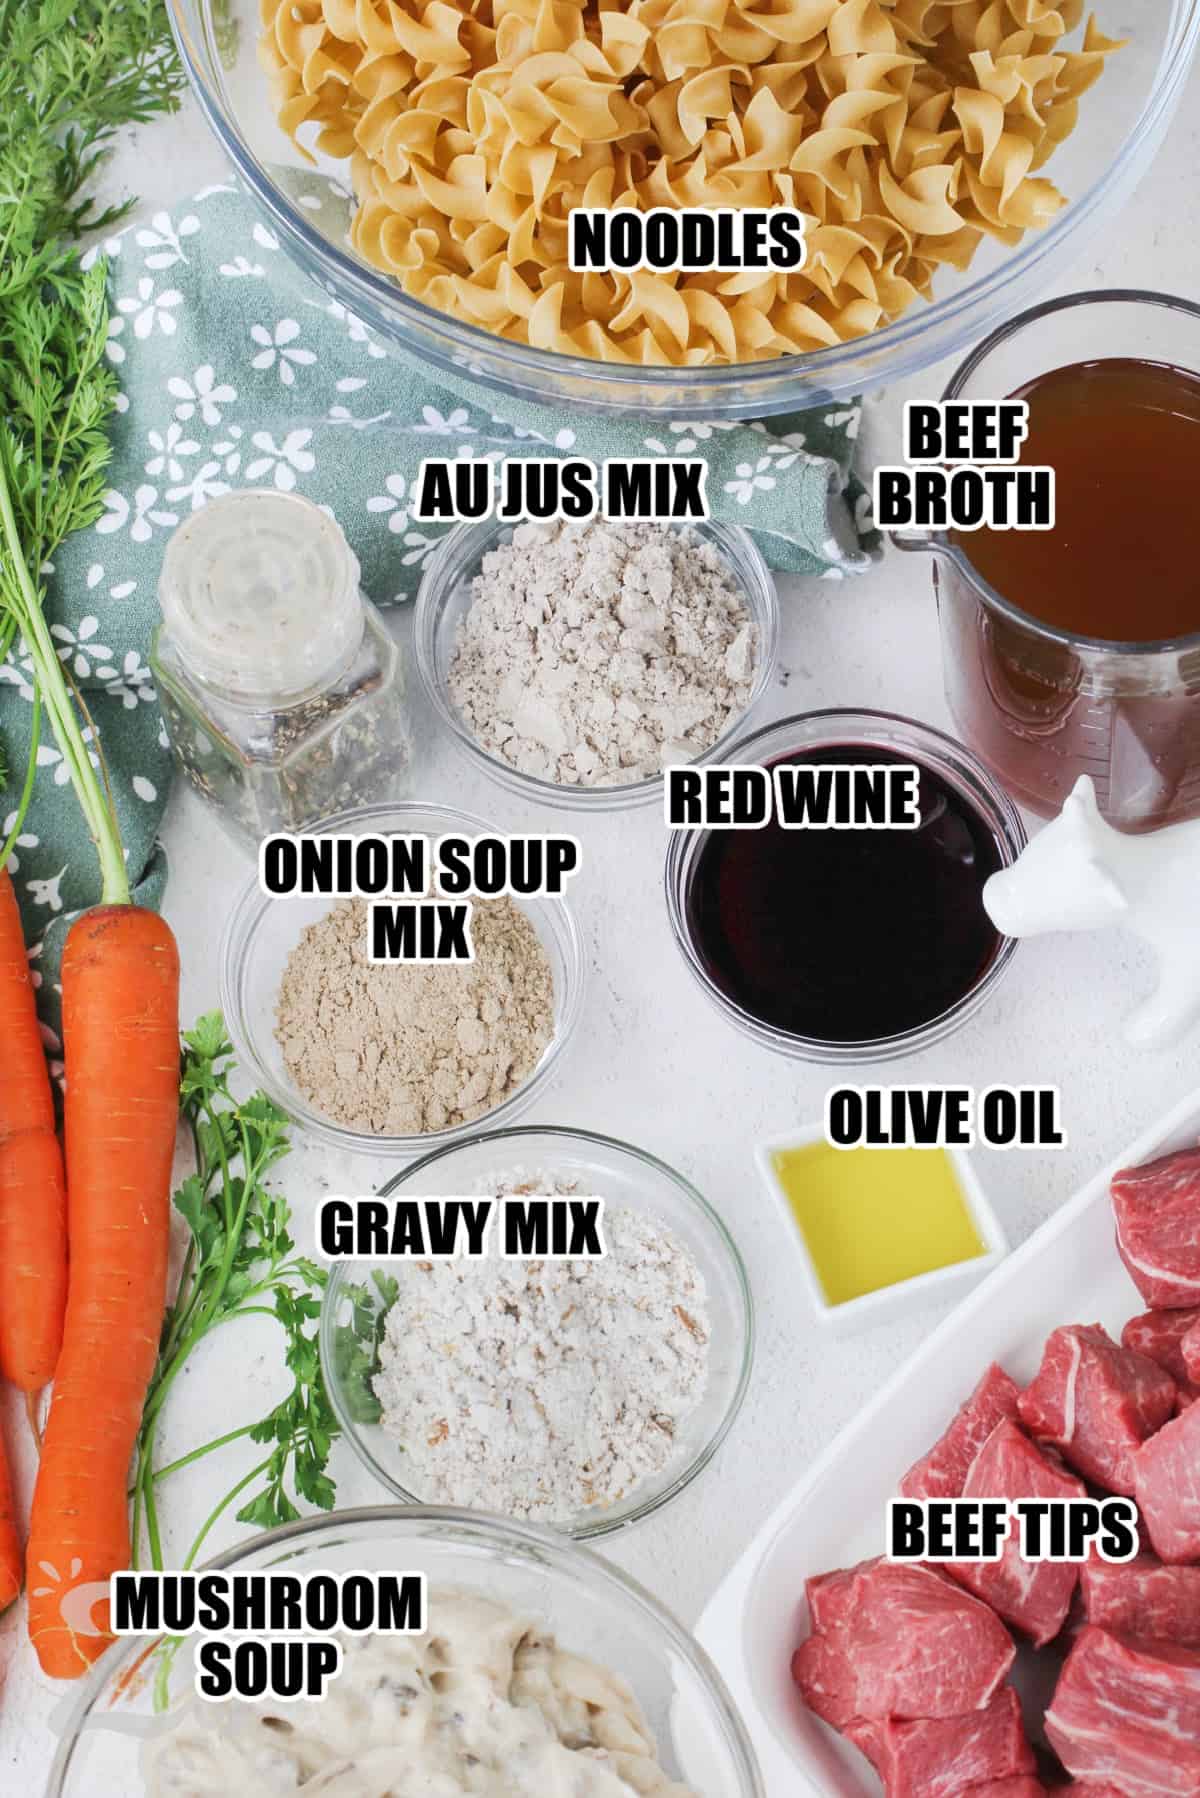 ingredients to make beef tips and gravy labeled: boodles, au jus mix, beef broth, onion soup mix, red wine, olive oil. gravy mix, beef tips, and mushroom soup.